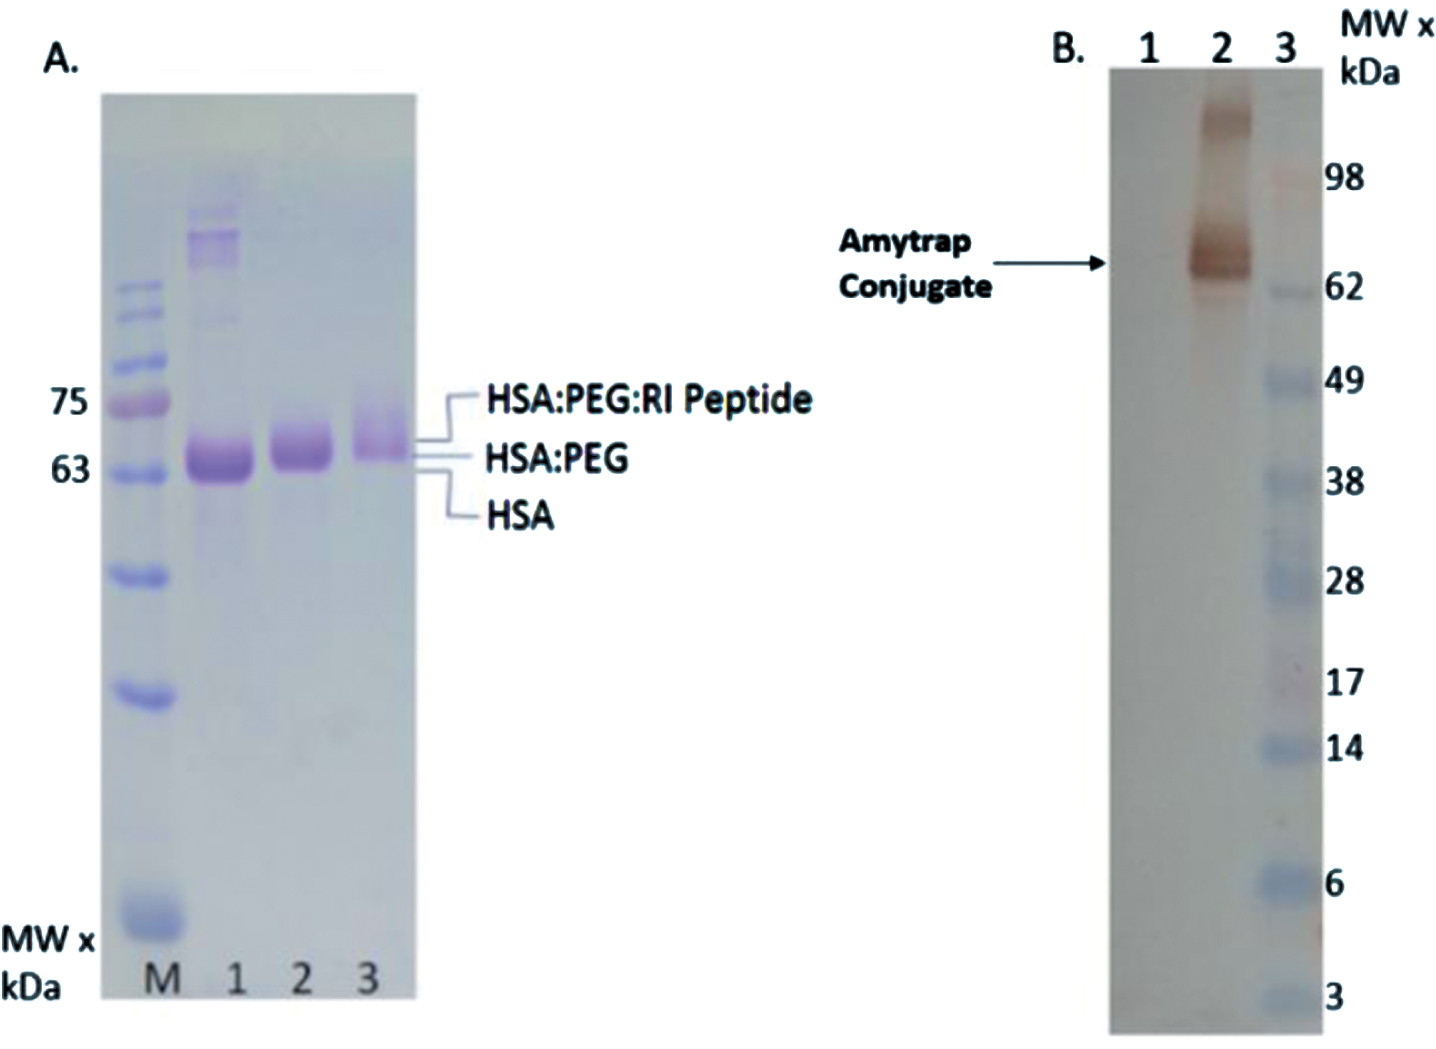 Conjugation of Amytrap peptide to albumin. A) Analysis of Amytrap conjugate by SDS-PAGE, Lane M, MW marker, lane 1, HSA, lane 2, HSA-PEG, lane 3 Amytrap conjugate (HSA-PEG-RI-peptide). B) Analysis of the conjugate by western blot. The blot was probed with anti-RI-peptide antibody followed by peroxidase labeled antibody. Lane 1, HSA, lane 2, Amytrap conjugate, lane 3, MW marker.